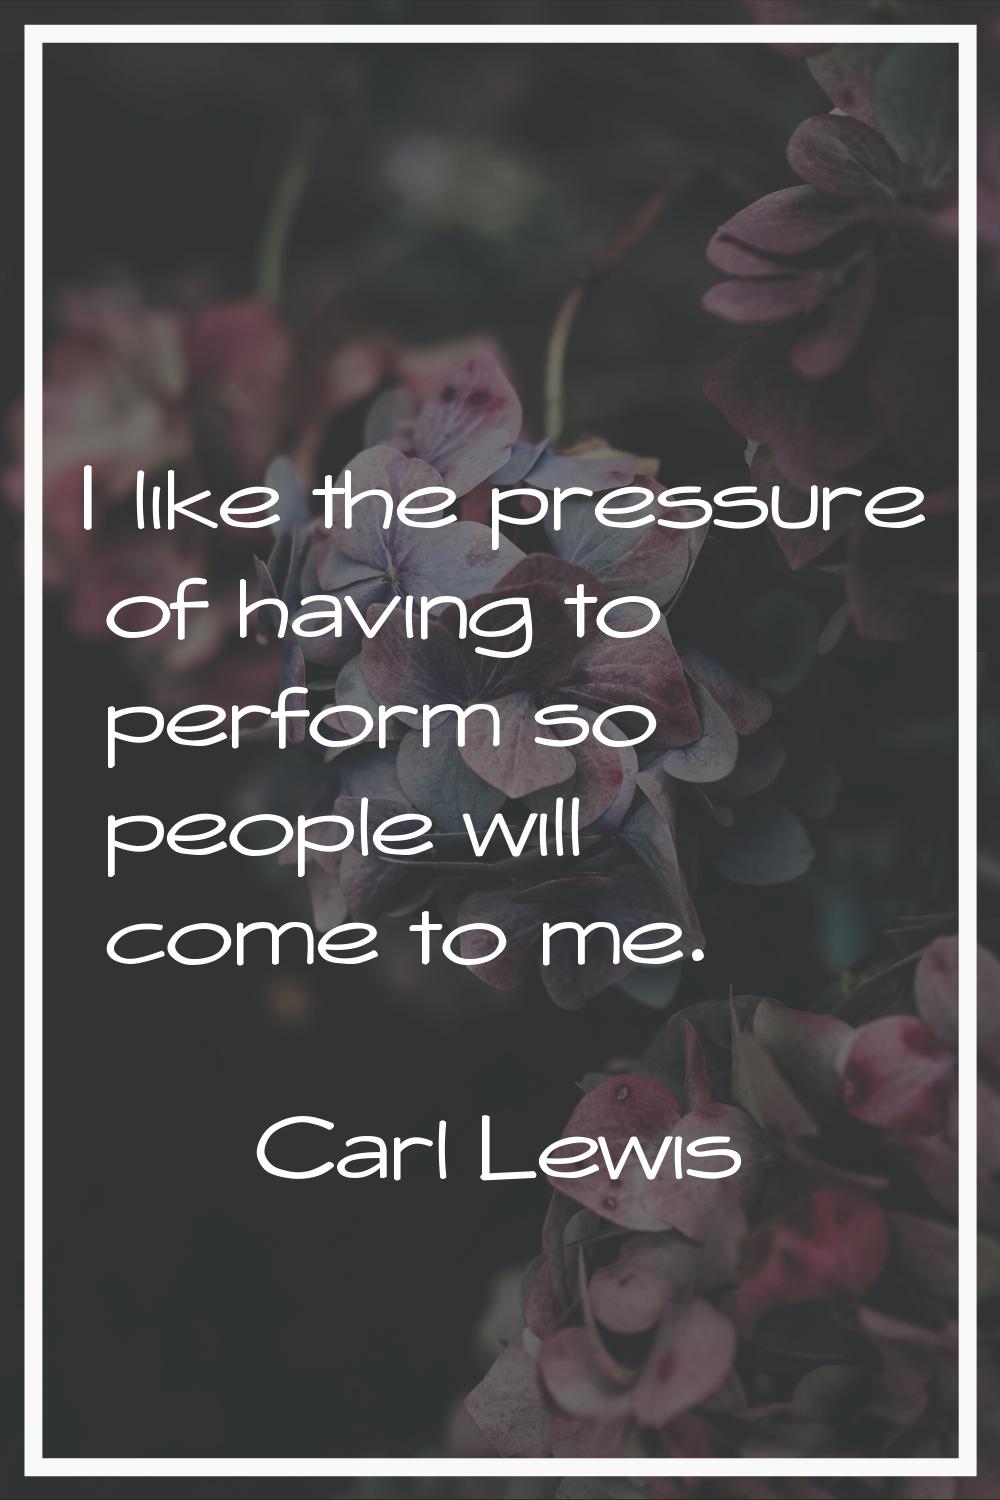 I like the pressure of having to perform so people will come to me.